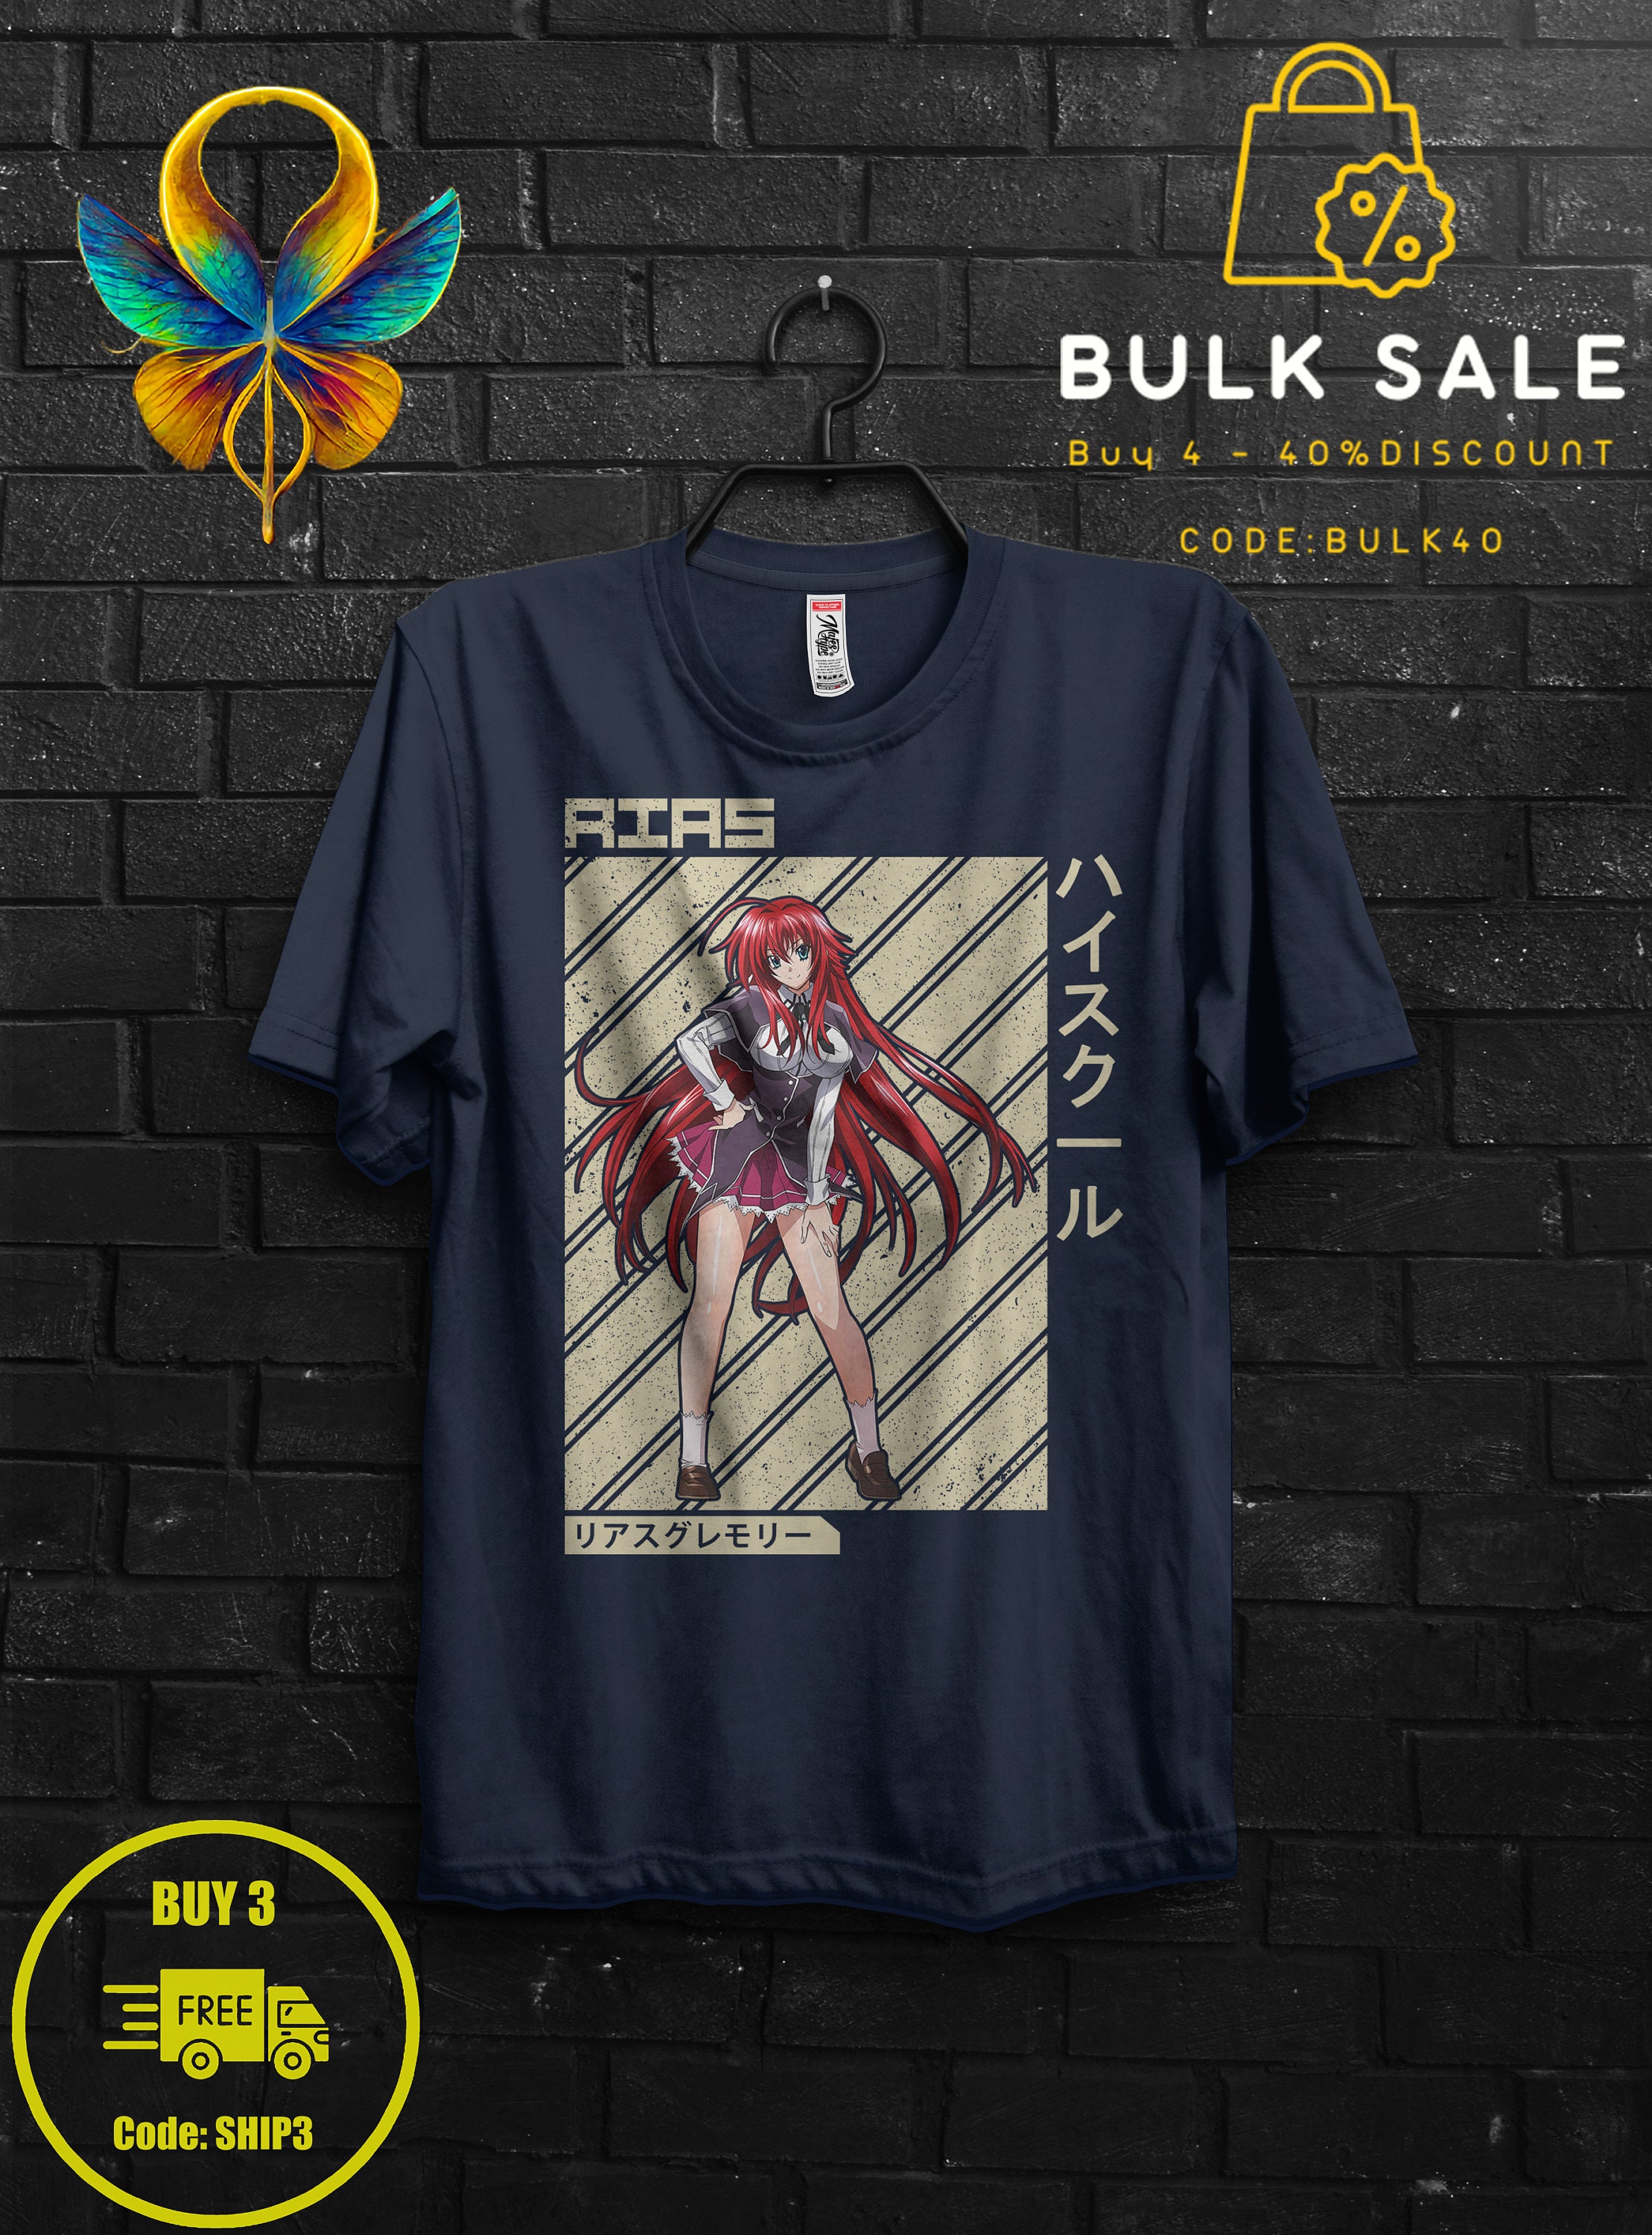 Rias Gremory Shirt Anime Gift Cosplay For Girl,High School DxD Tee,Xenovia Appareal For Her,Issei Hyoudou Sweat,Rossweisse Tshirt For Sitri 1600235207